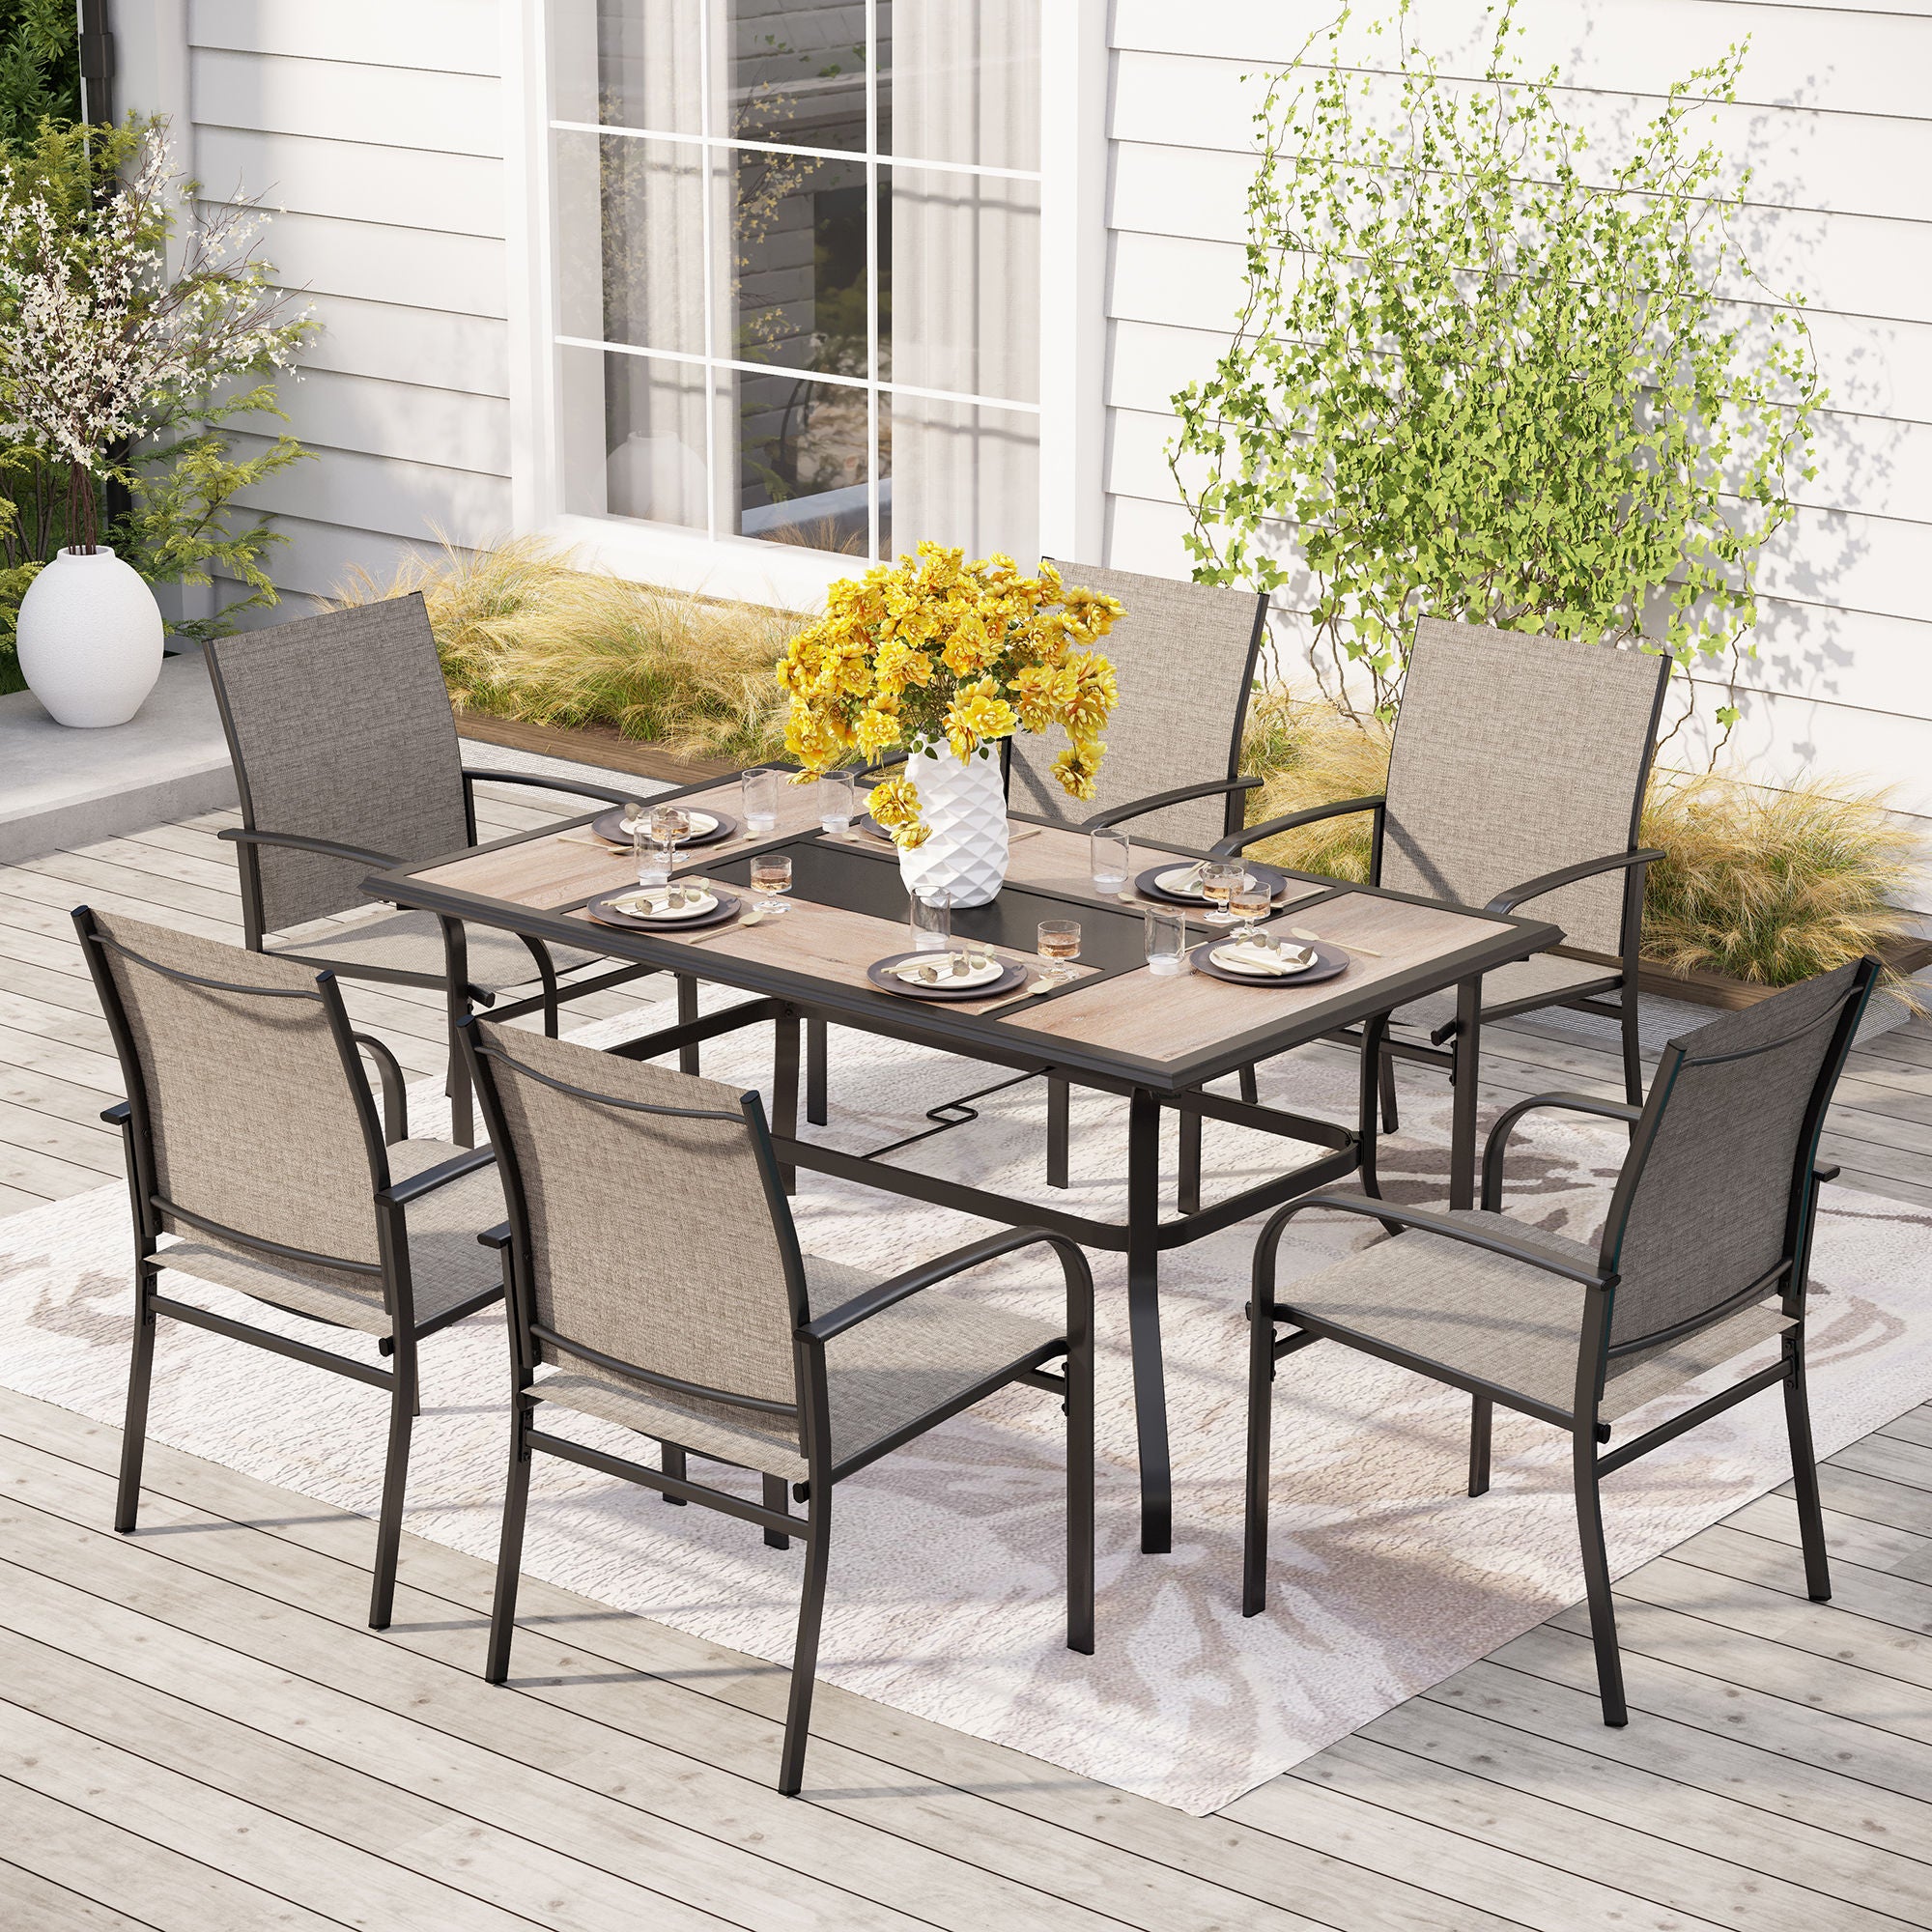 Sophia & William 7-Piece Patio Dining Sets Geometric Table & Textilene Fixed Chairs